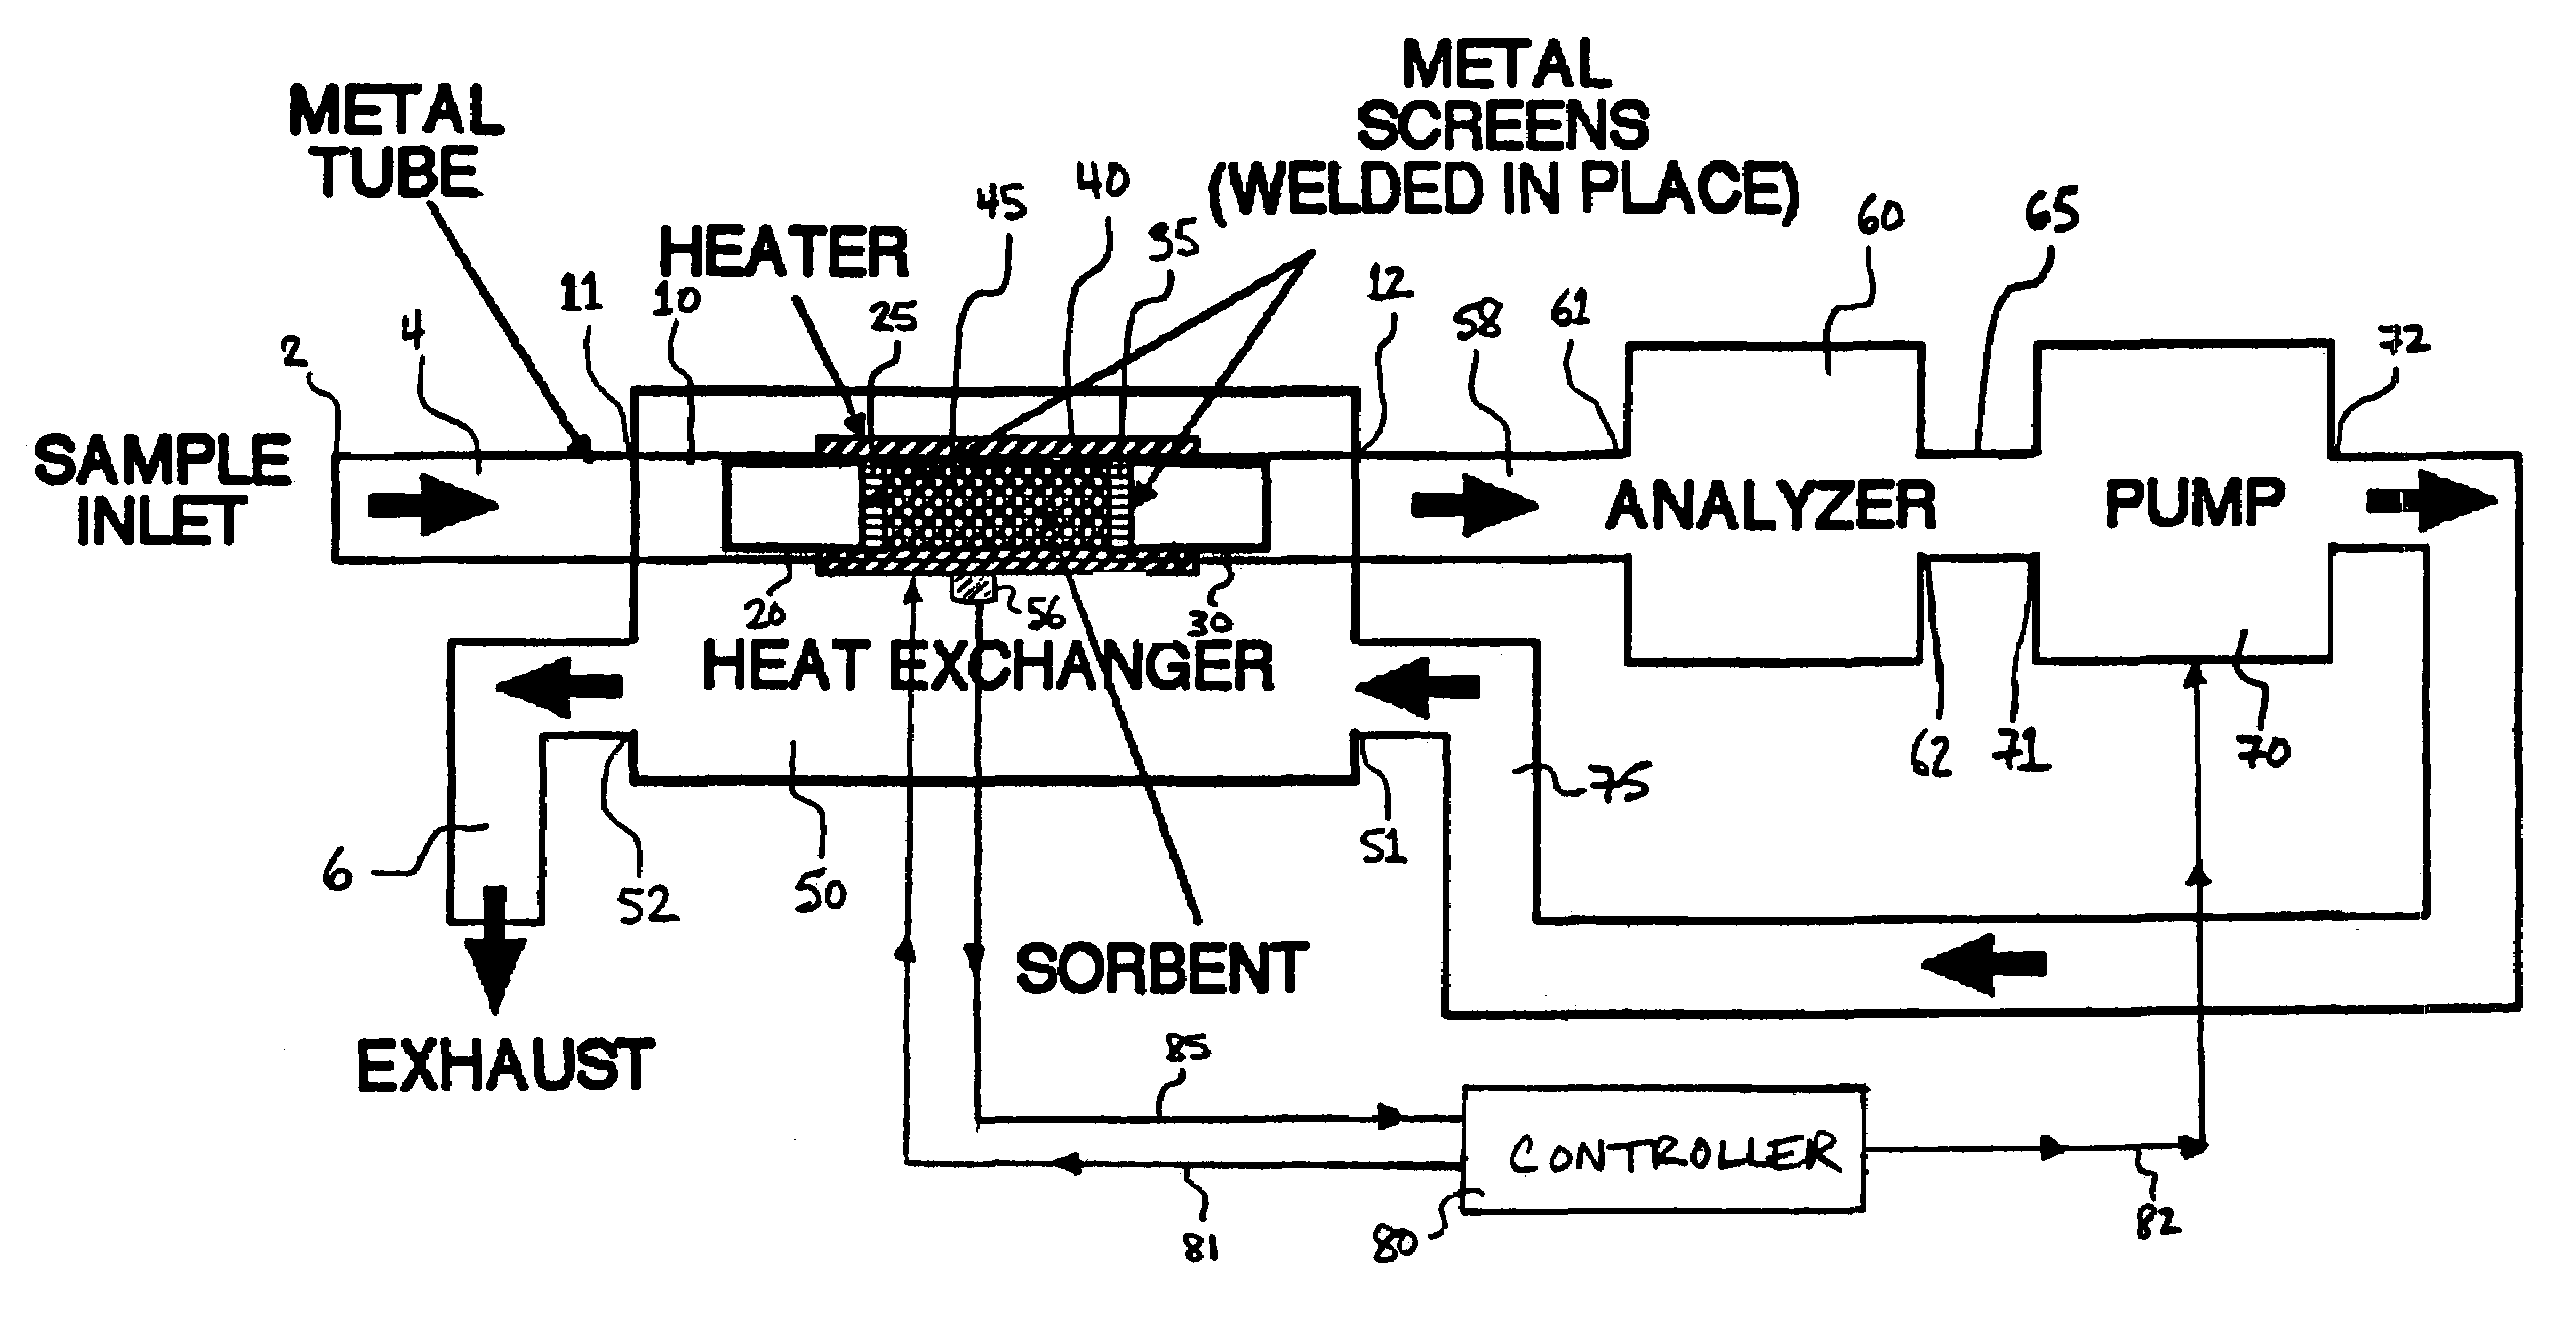 System, apparatus and method for concentrating chemical vapors